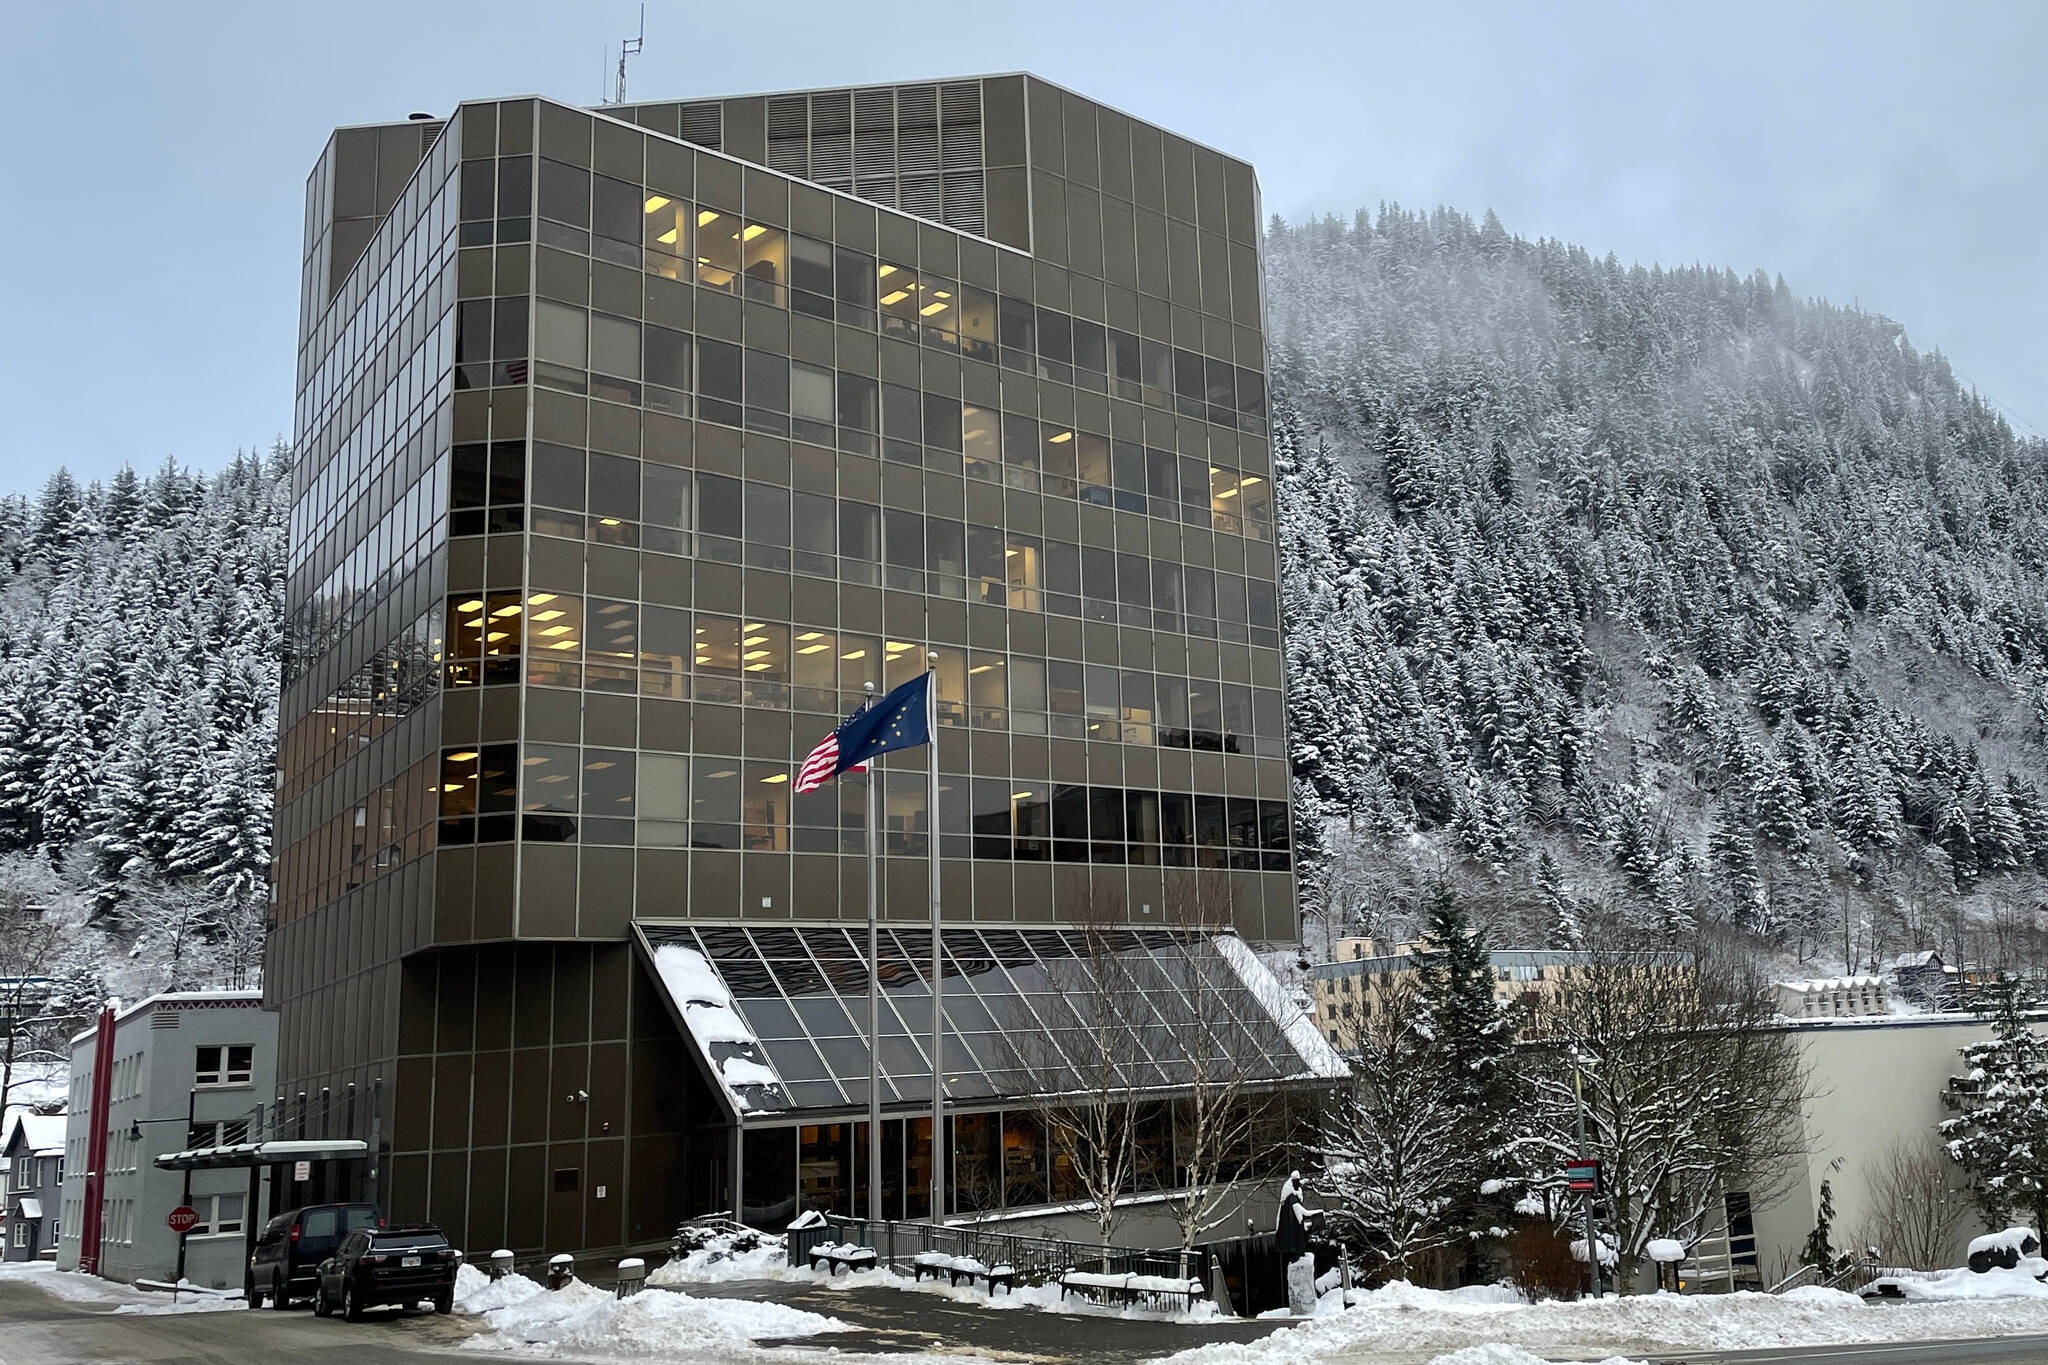 A Juneau man was indicted Friday for dozens of felony sexual abuse of a minor and assault charges. (Michael S. Lockett / Juneau Empire file)